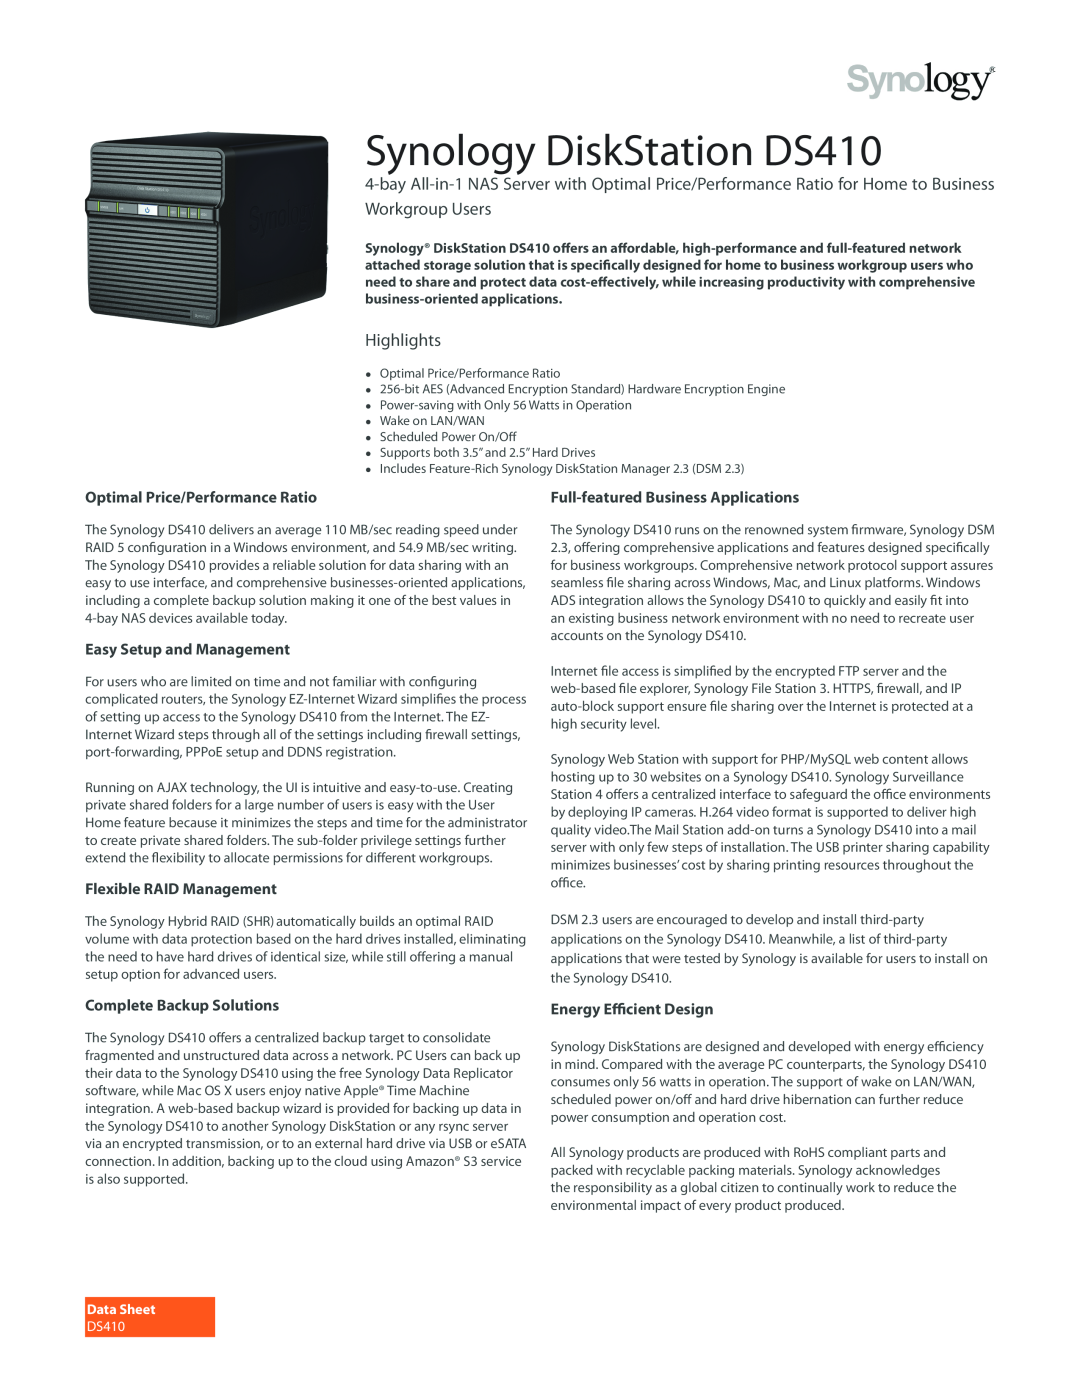 Synology manual Data Sheet, Synology DiskStation DS410, Highlights, Optimal Price/Performance Ratio 